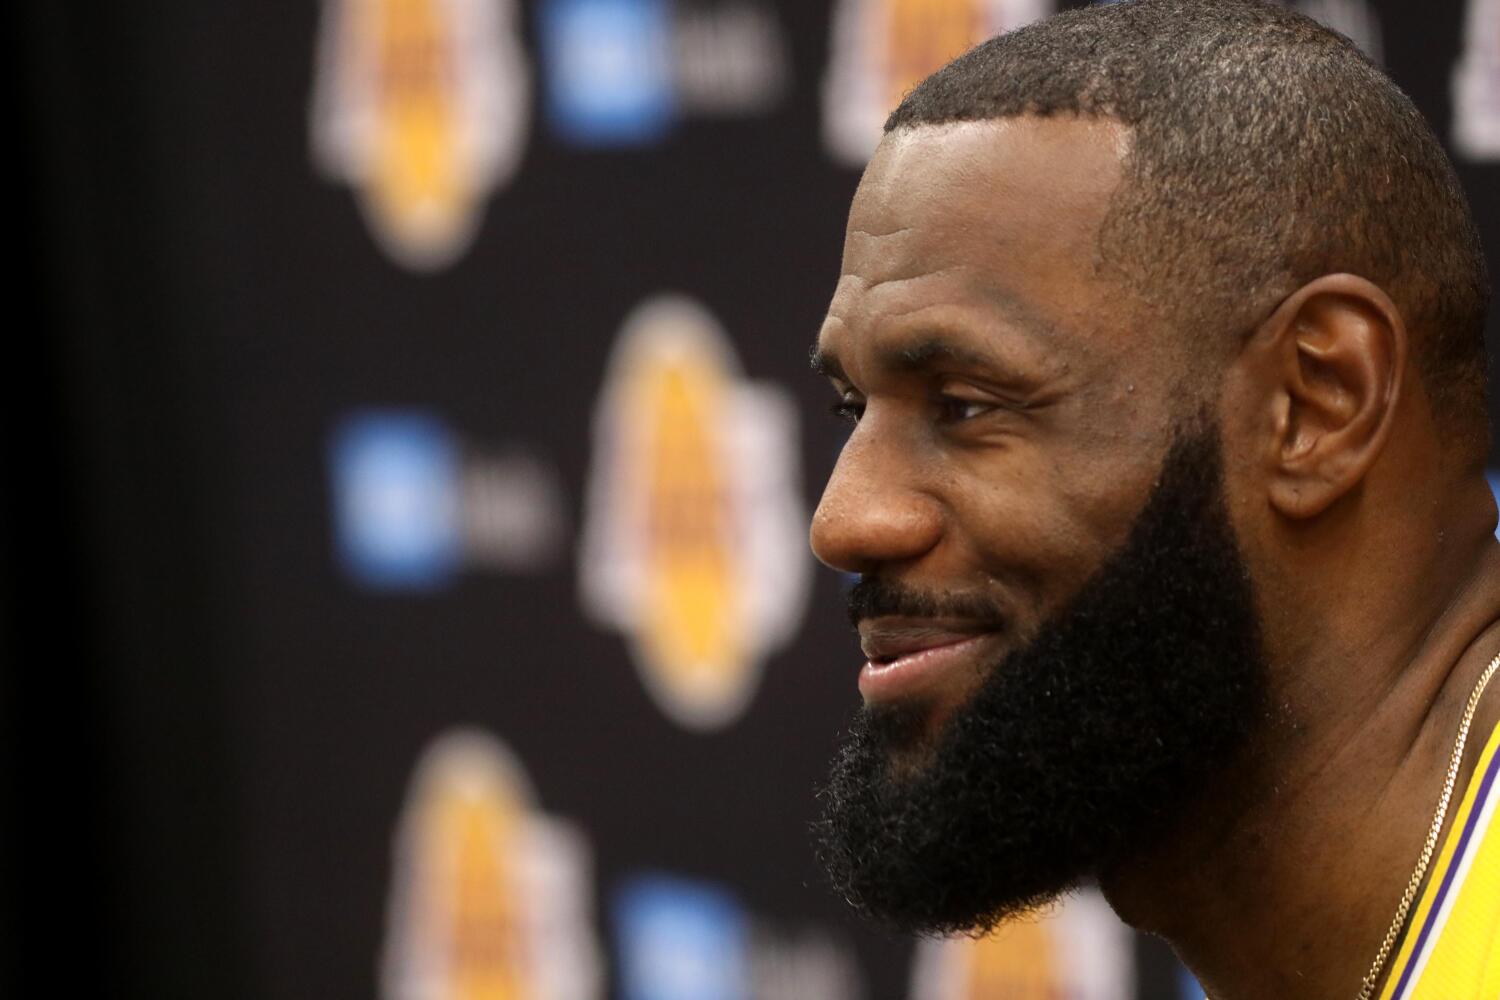 'I'm self-motivated': Lakers star LeBron James says he's ready for Year 21